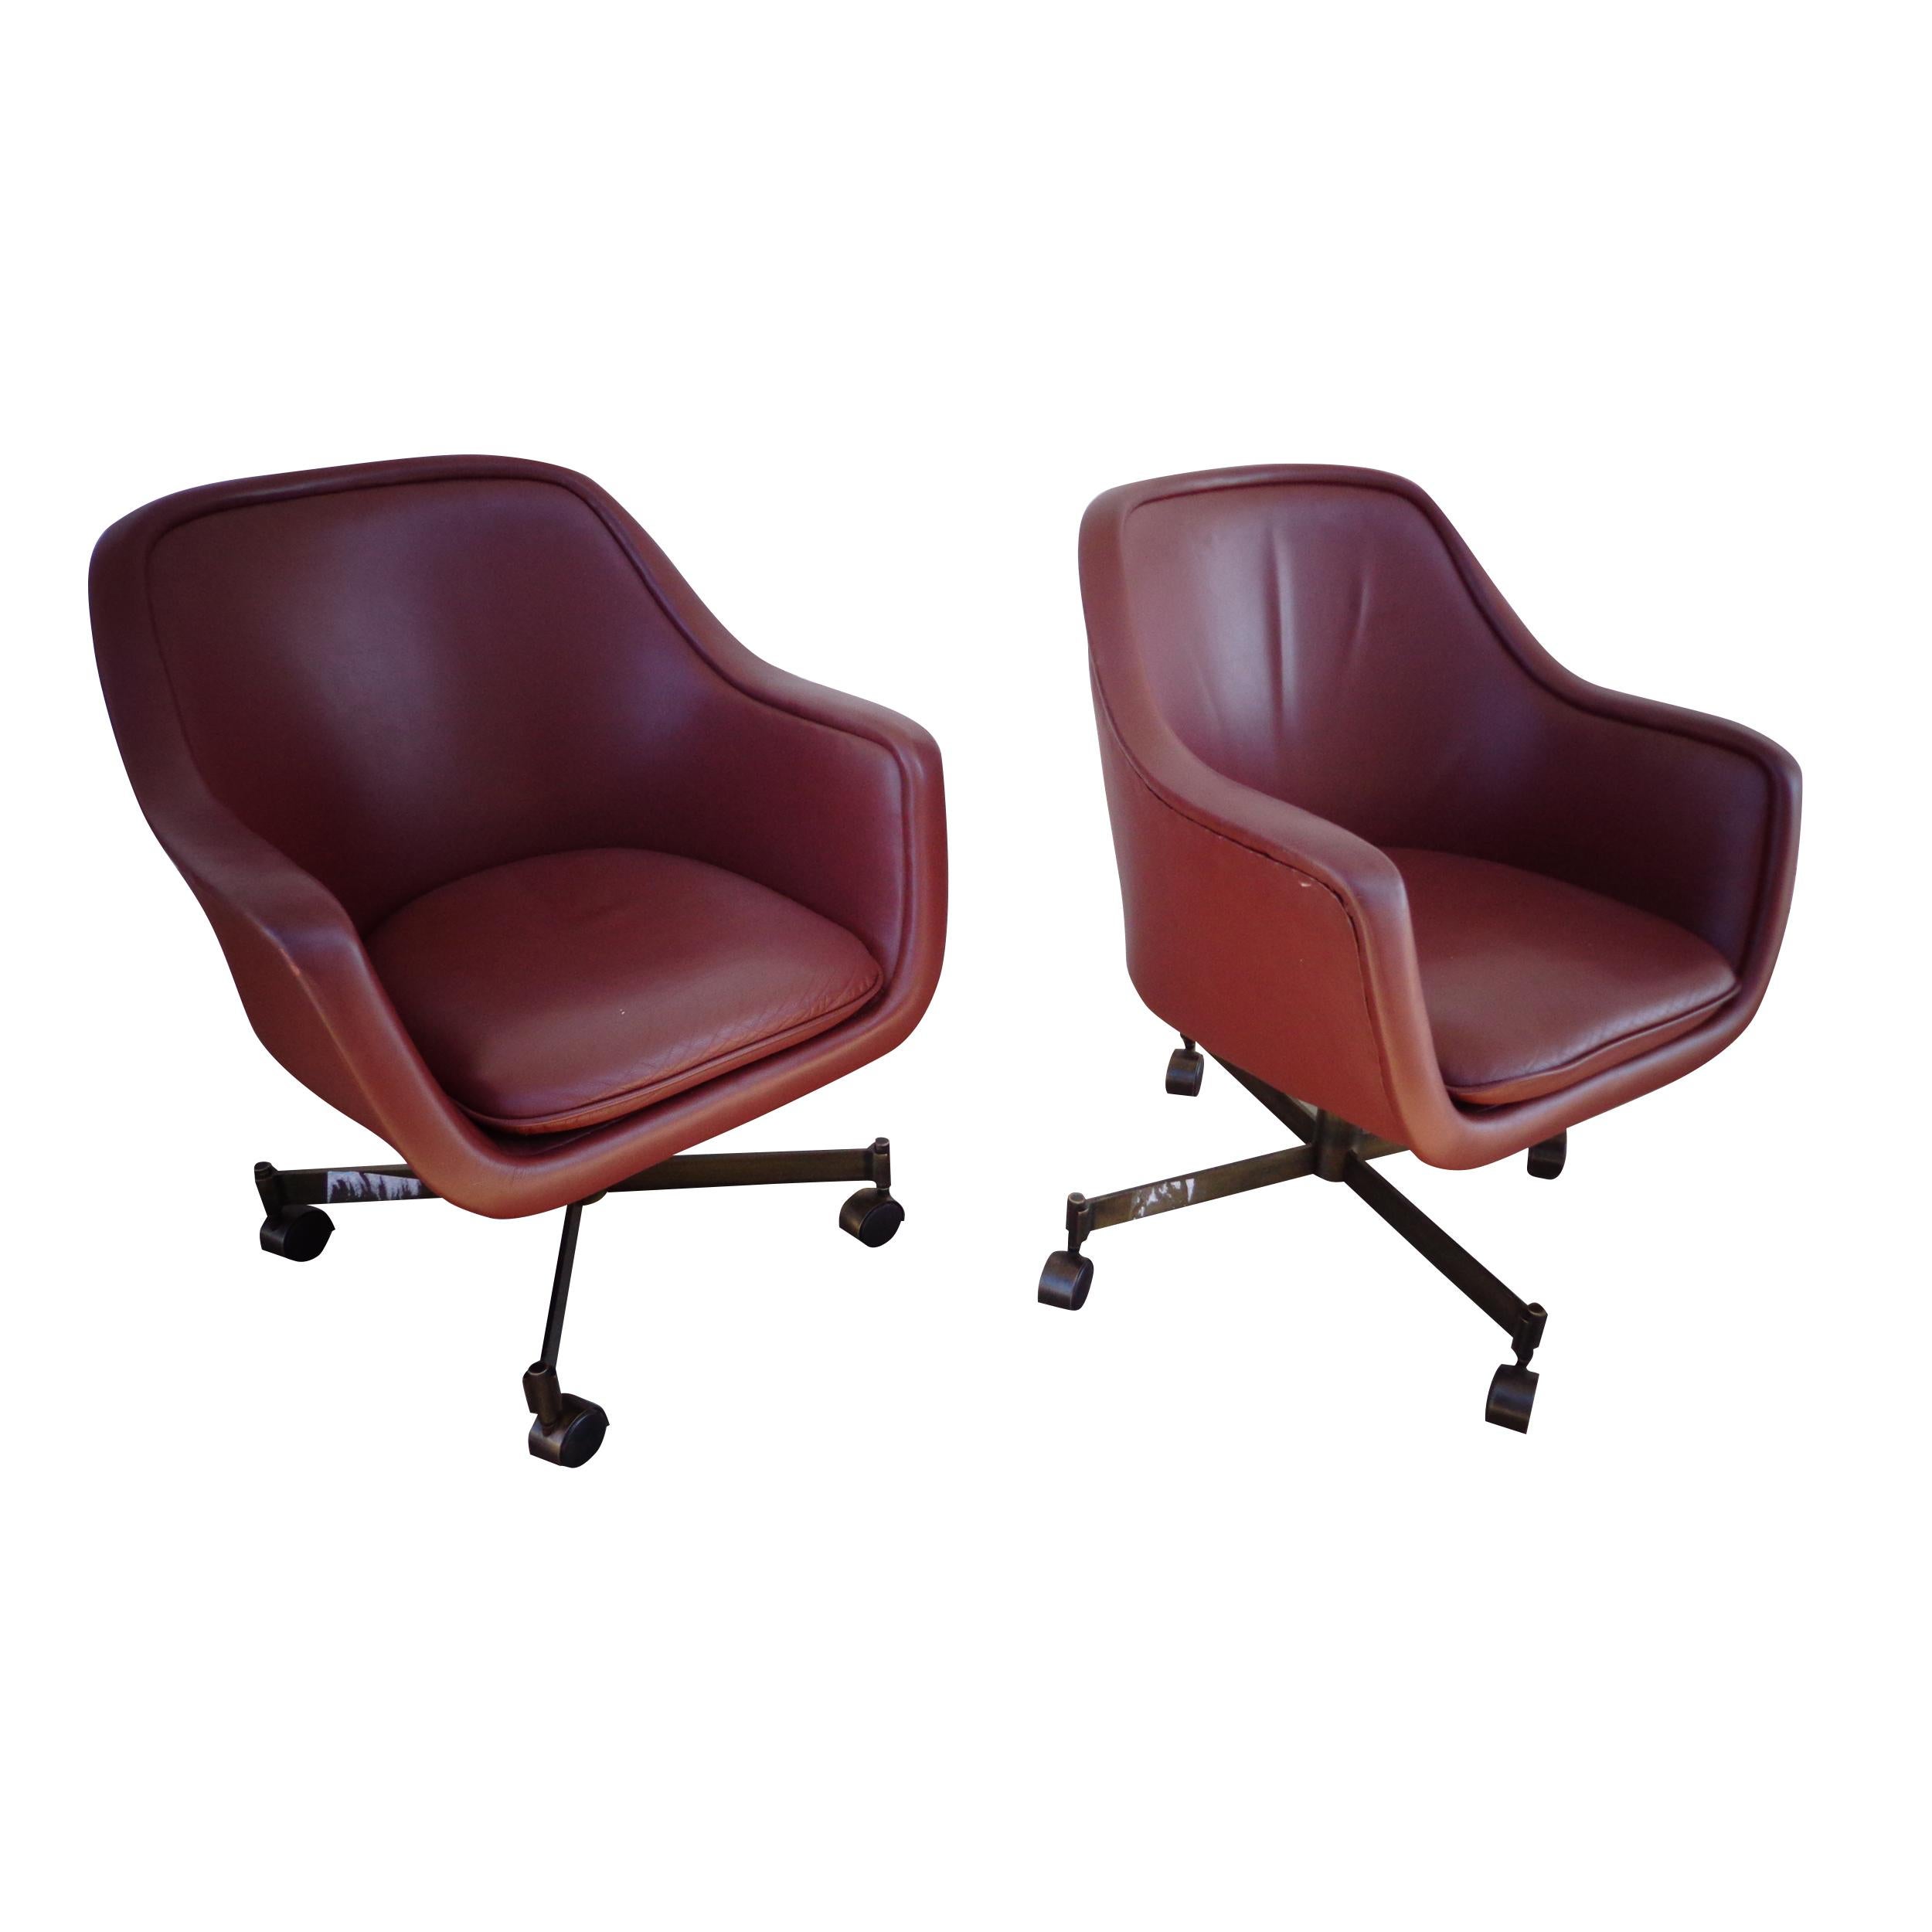 1 Ward Bennett for Brickel and associates barrel-back leather chair


4-star anodized bronze base swivel conference room chair in a rich brown leather.

Chair swivels and is height adjustable. Four available.